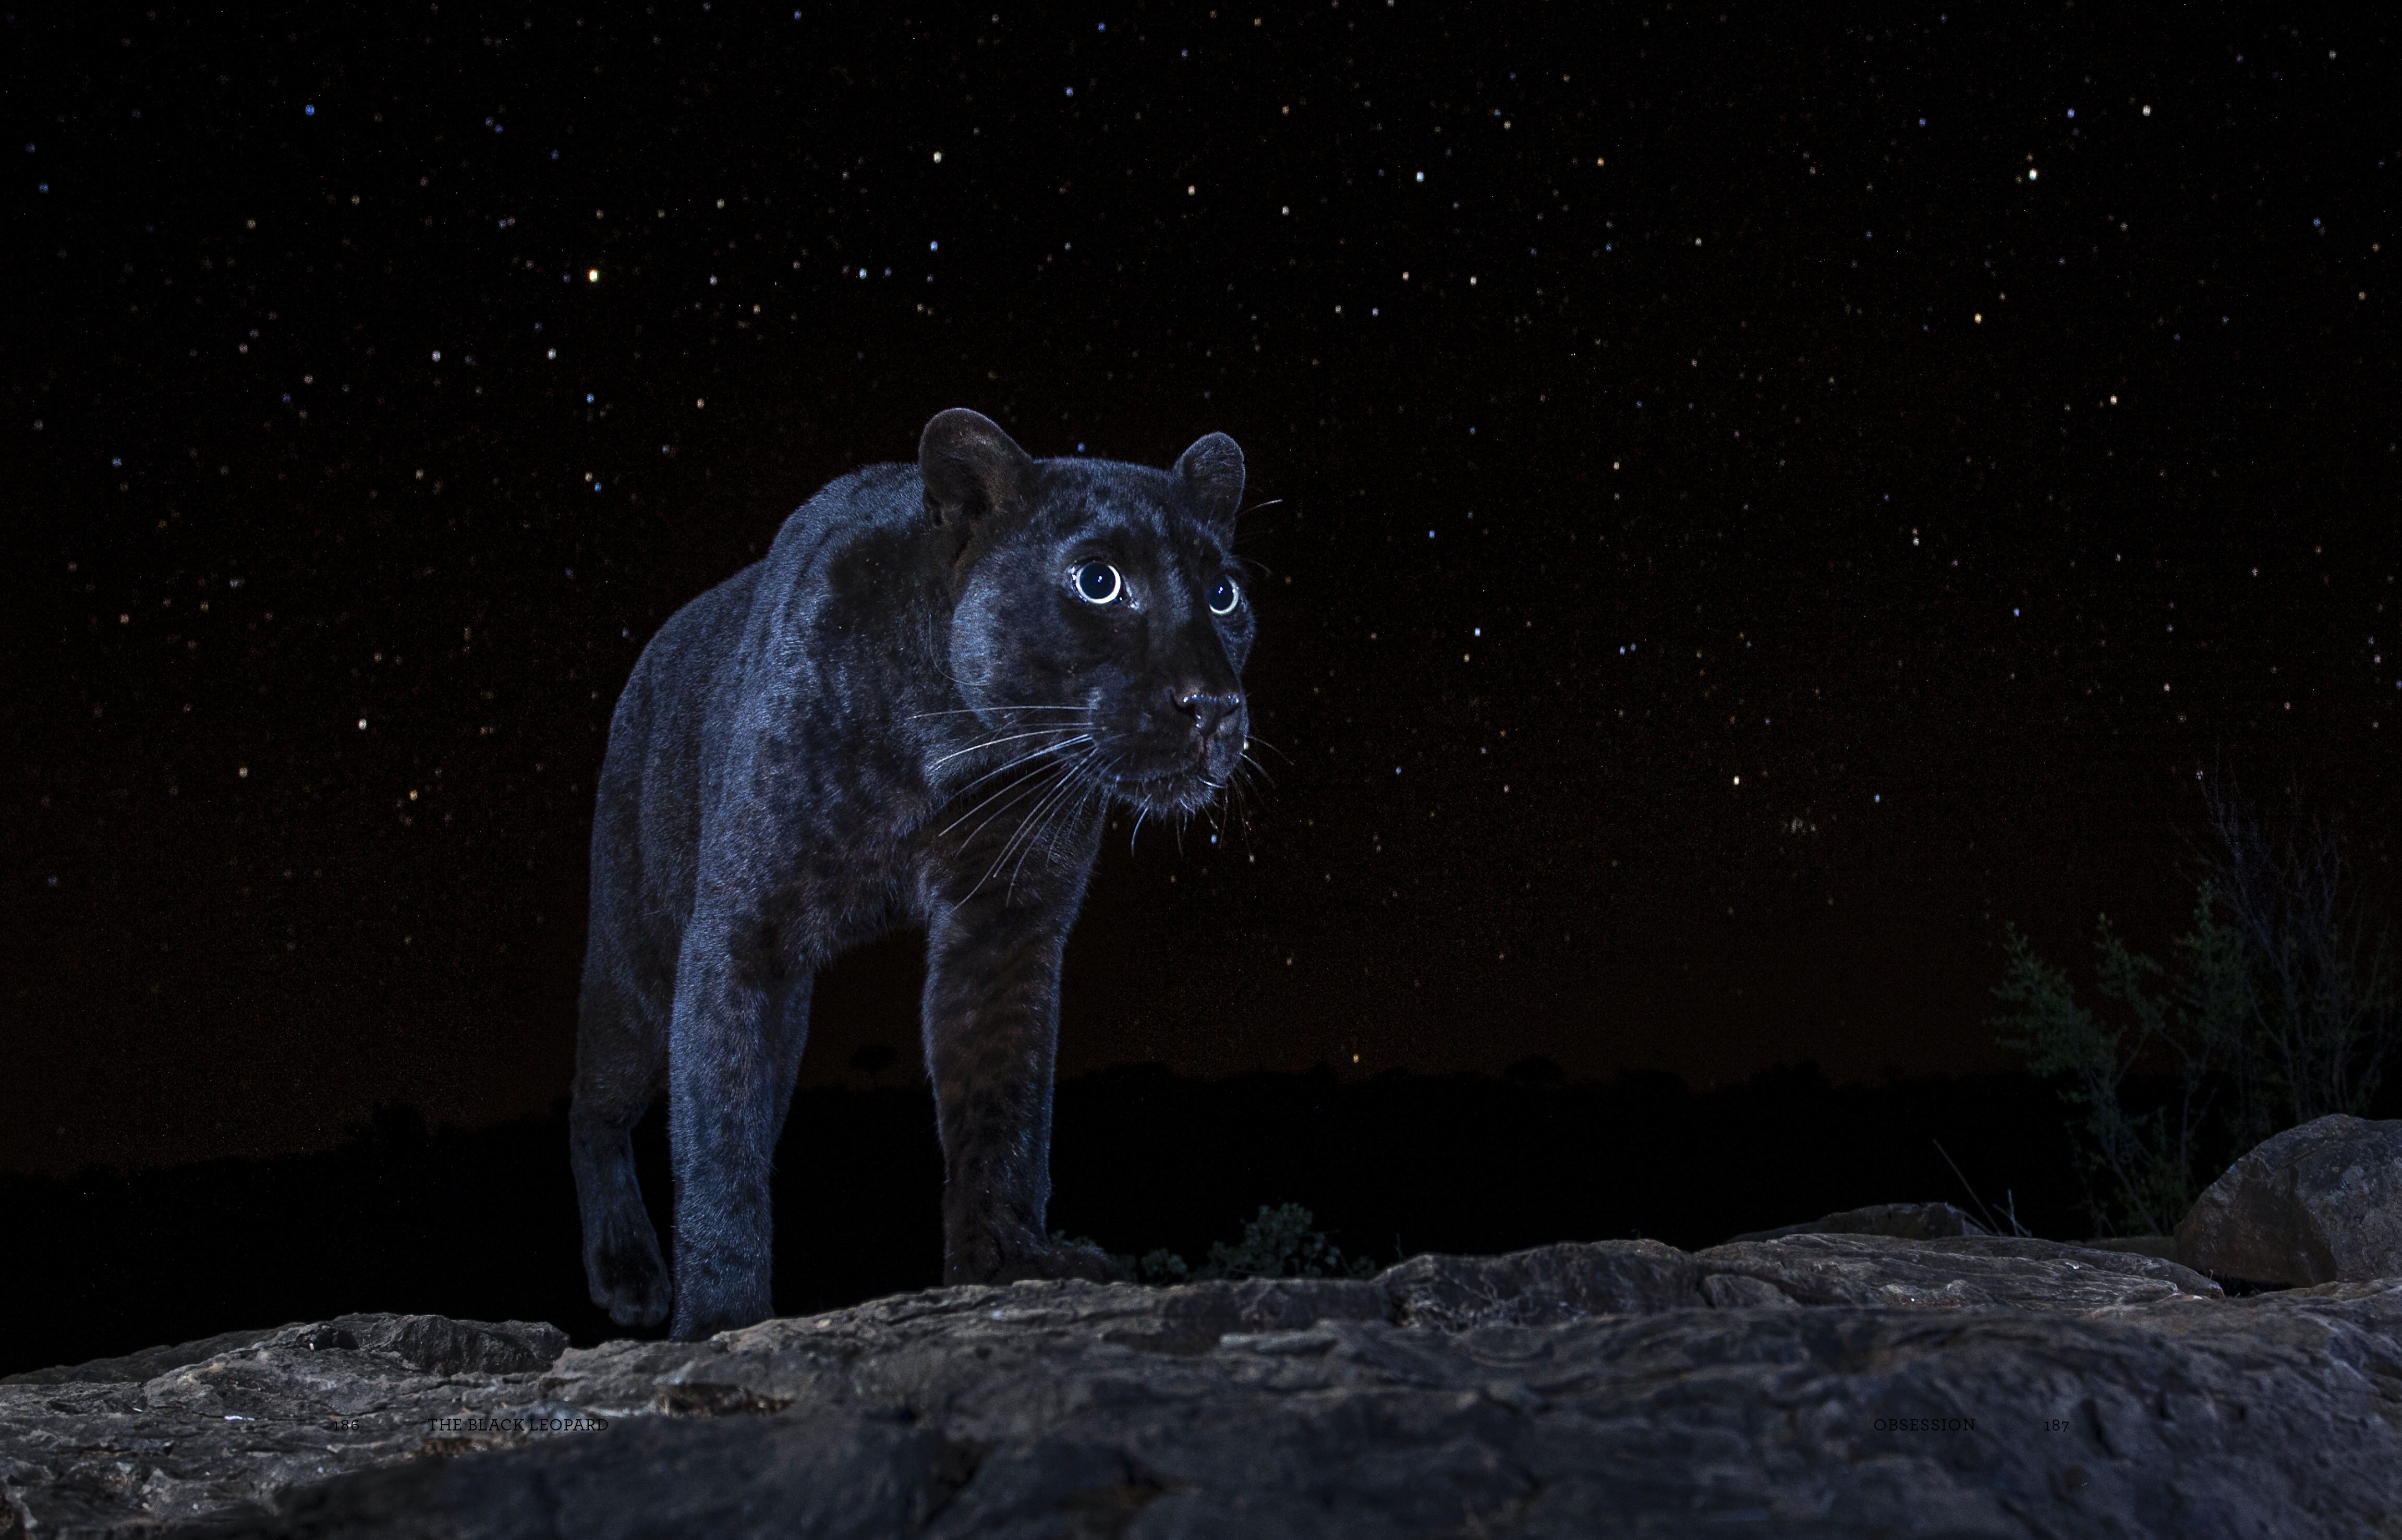 From The Black Leopard_image copyright Will Burrard-Lucas_186-187